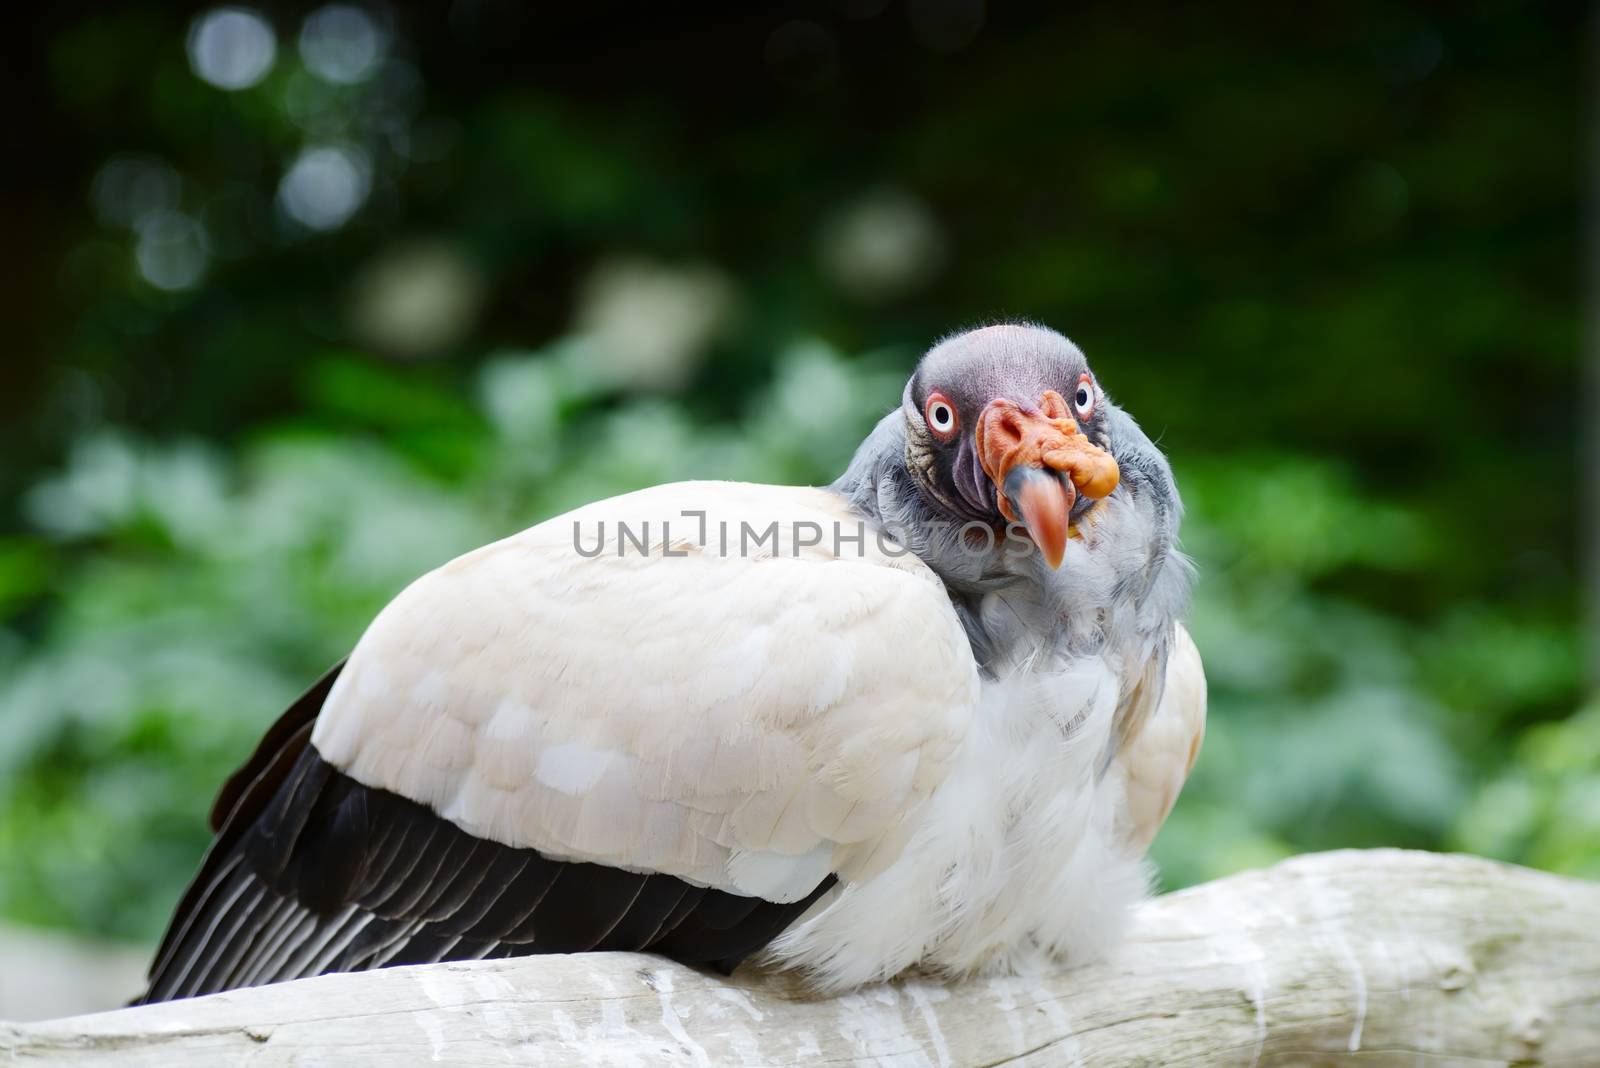 King Vulture by kmwphotography